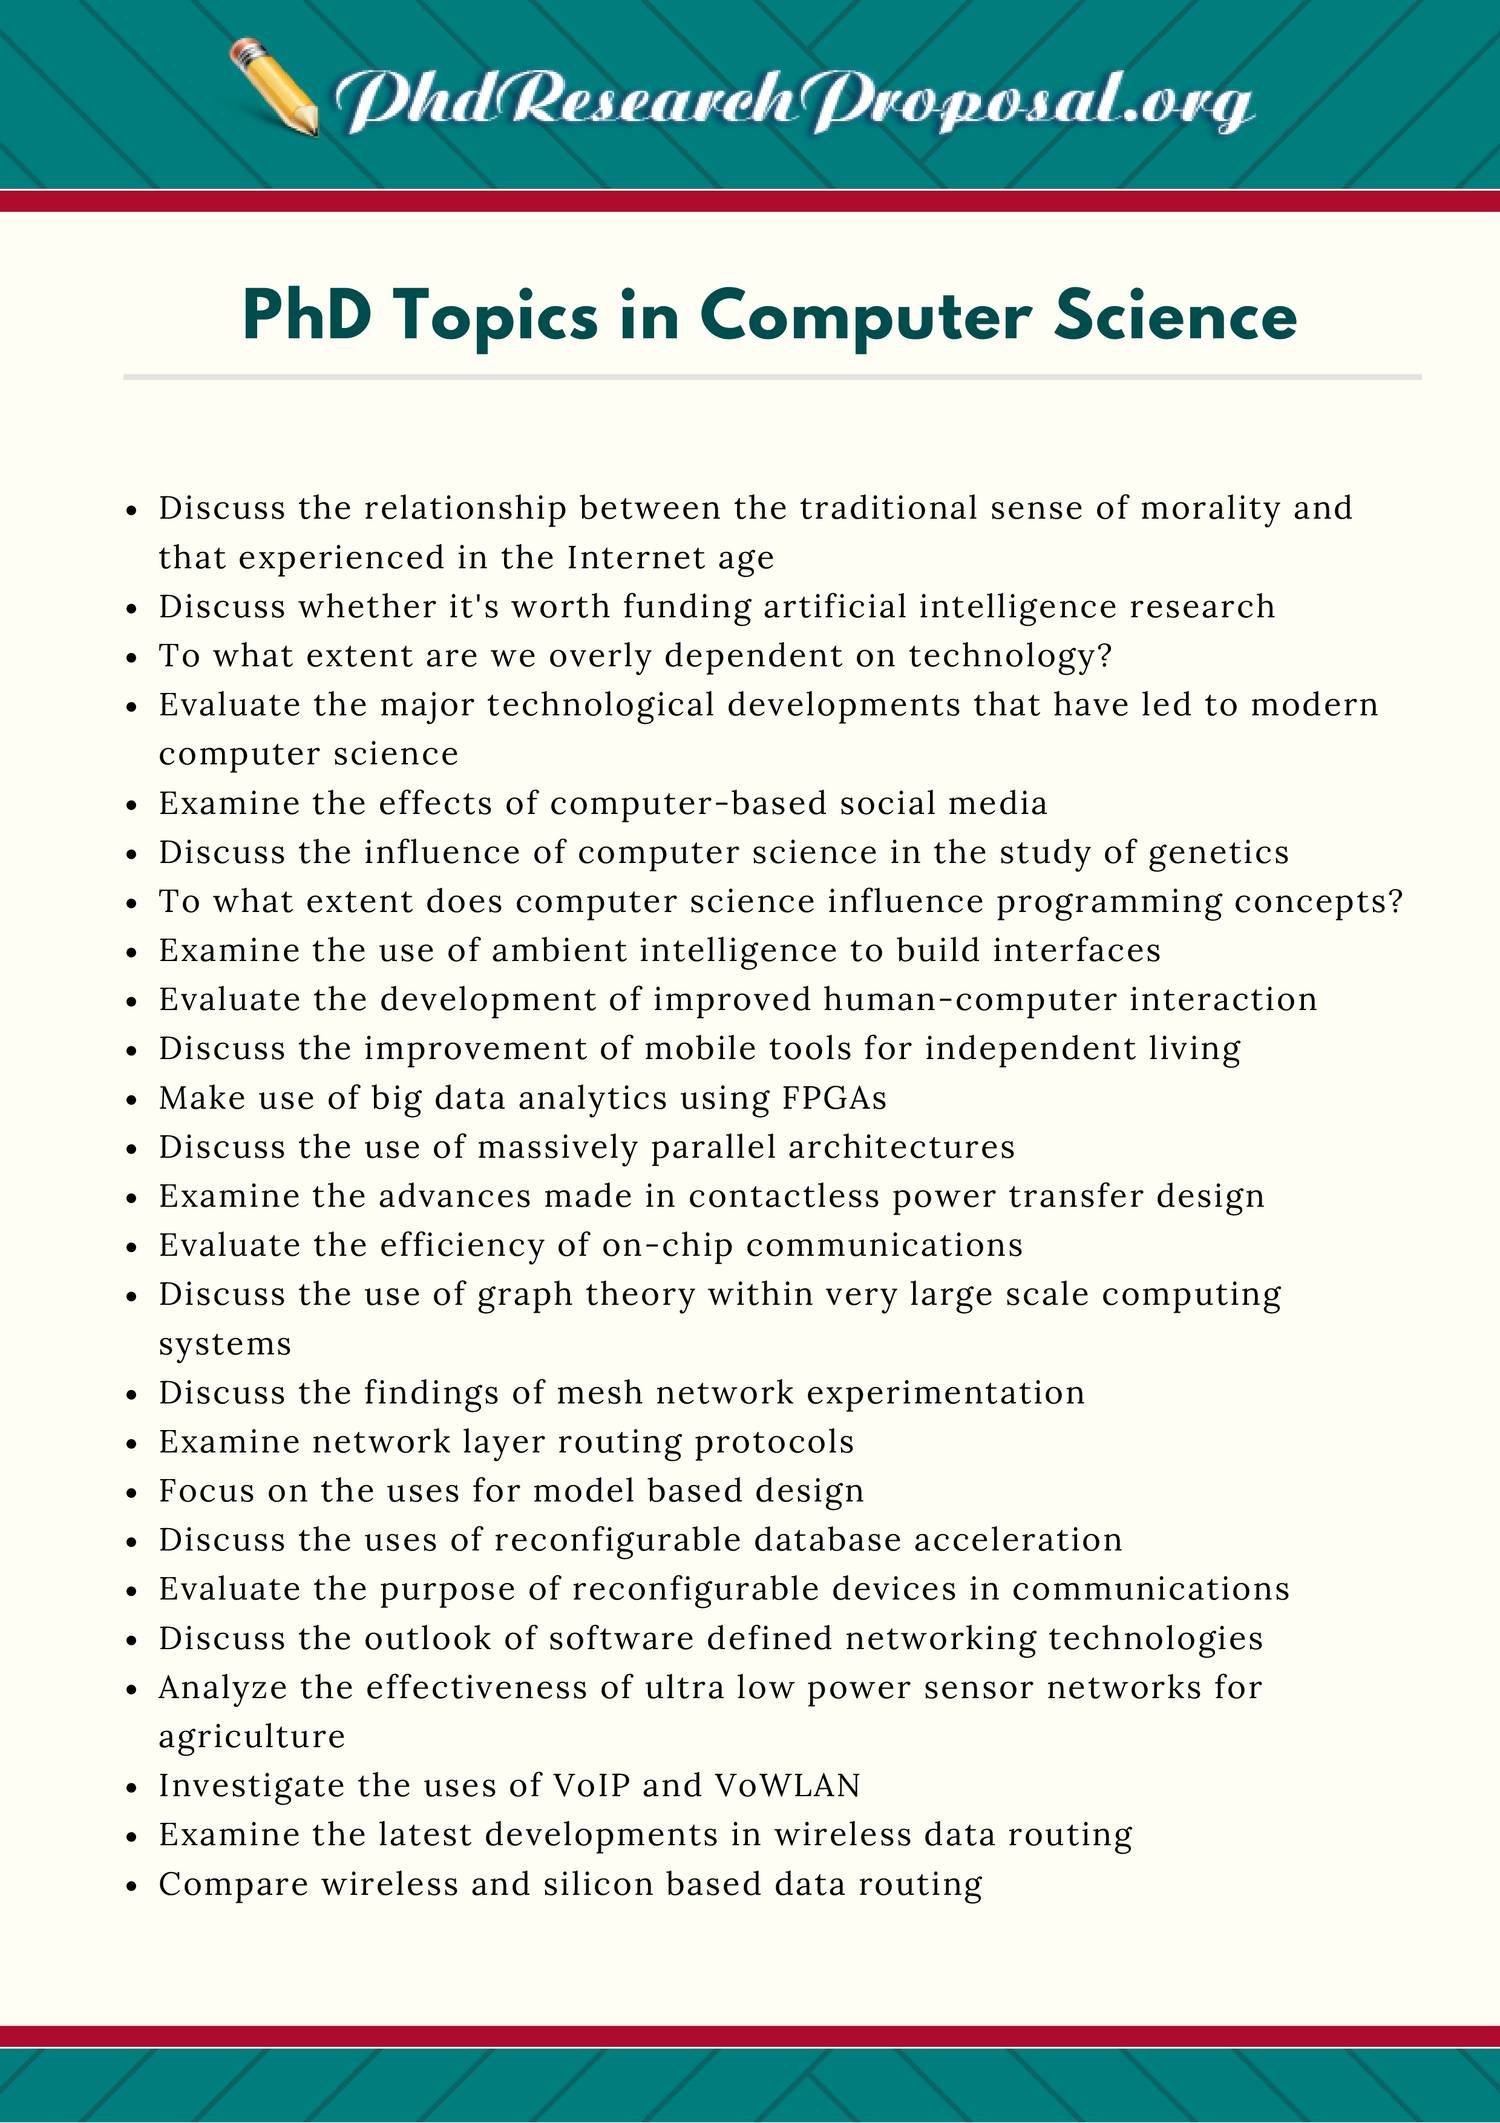 which is the best topic for phd in computer science